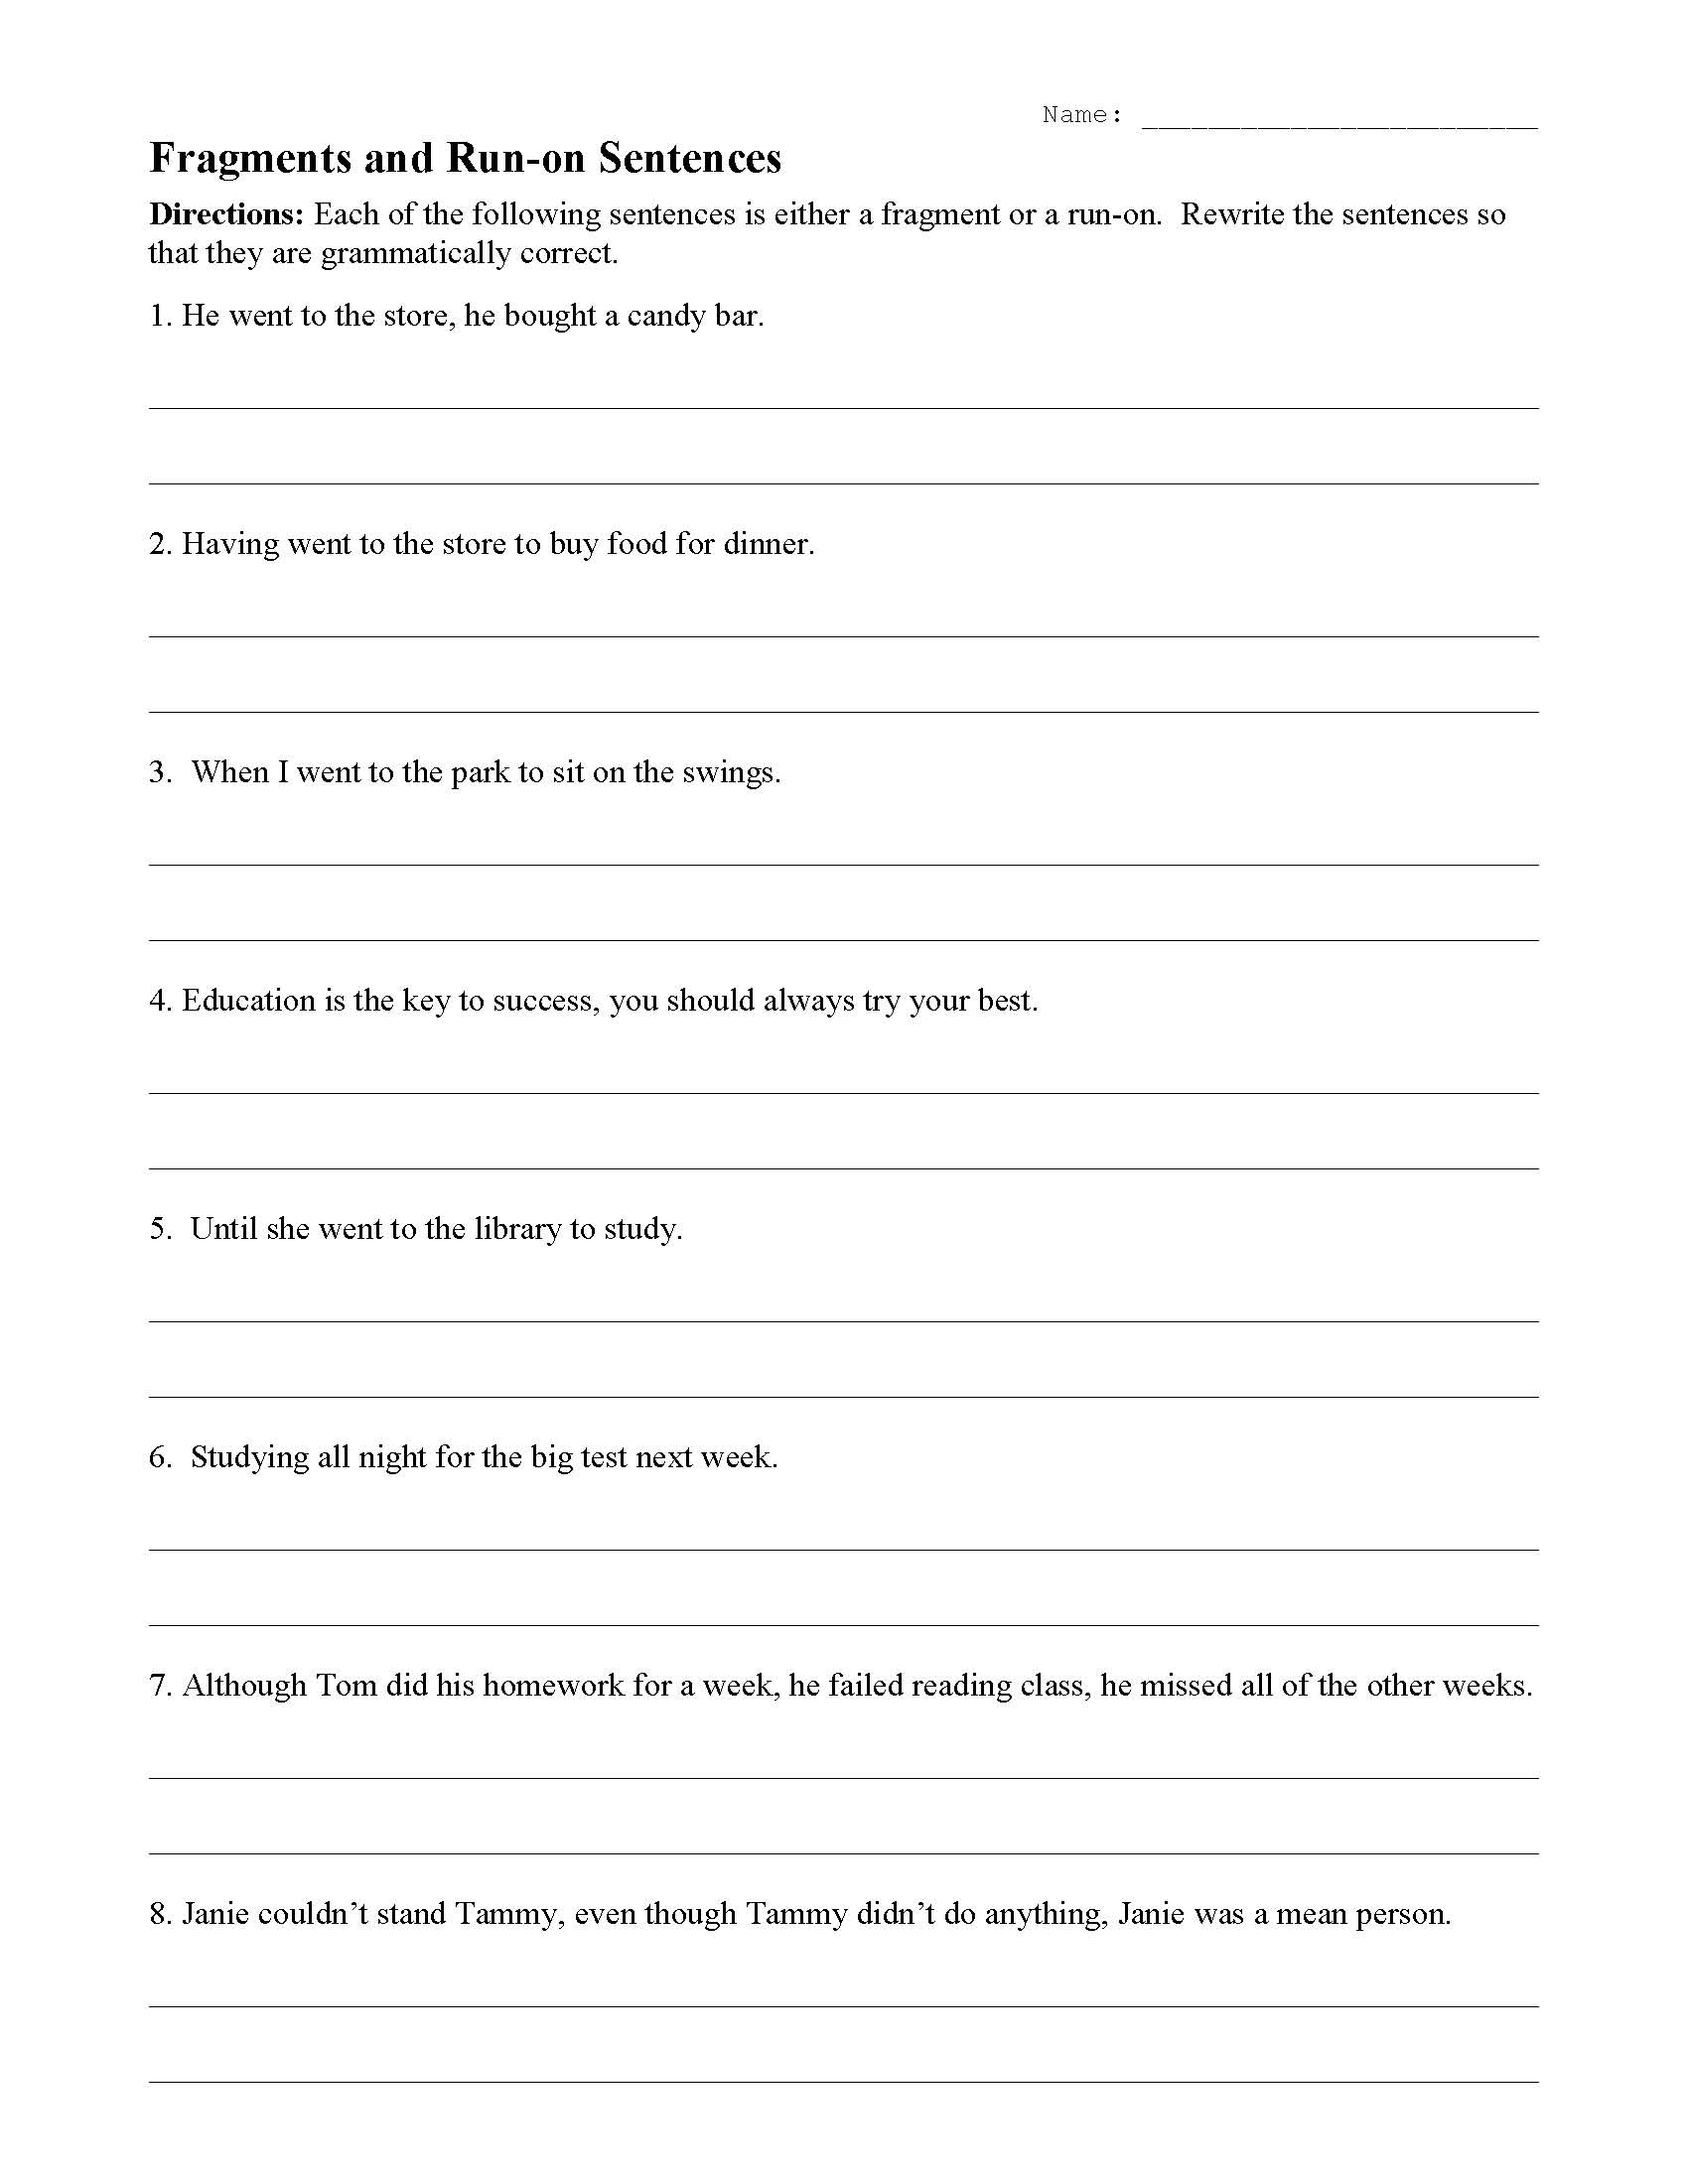 This is a preview image of Fragments and Run-On Sentences Worksheet. Click on it to enlarge it or view the source file.